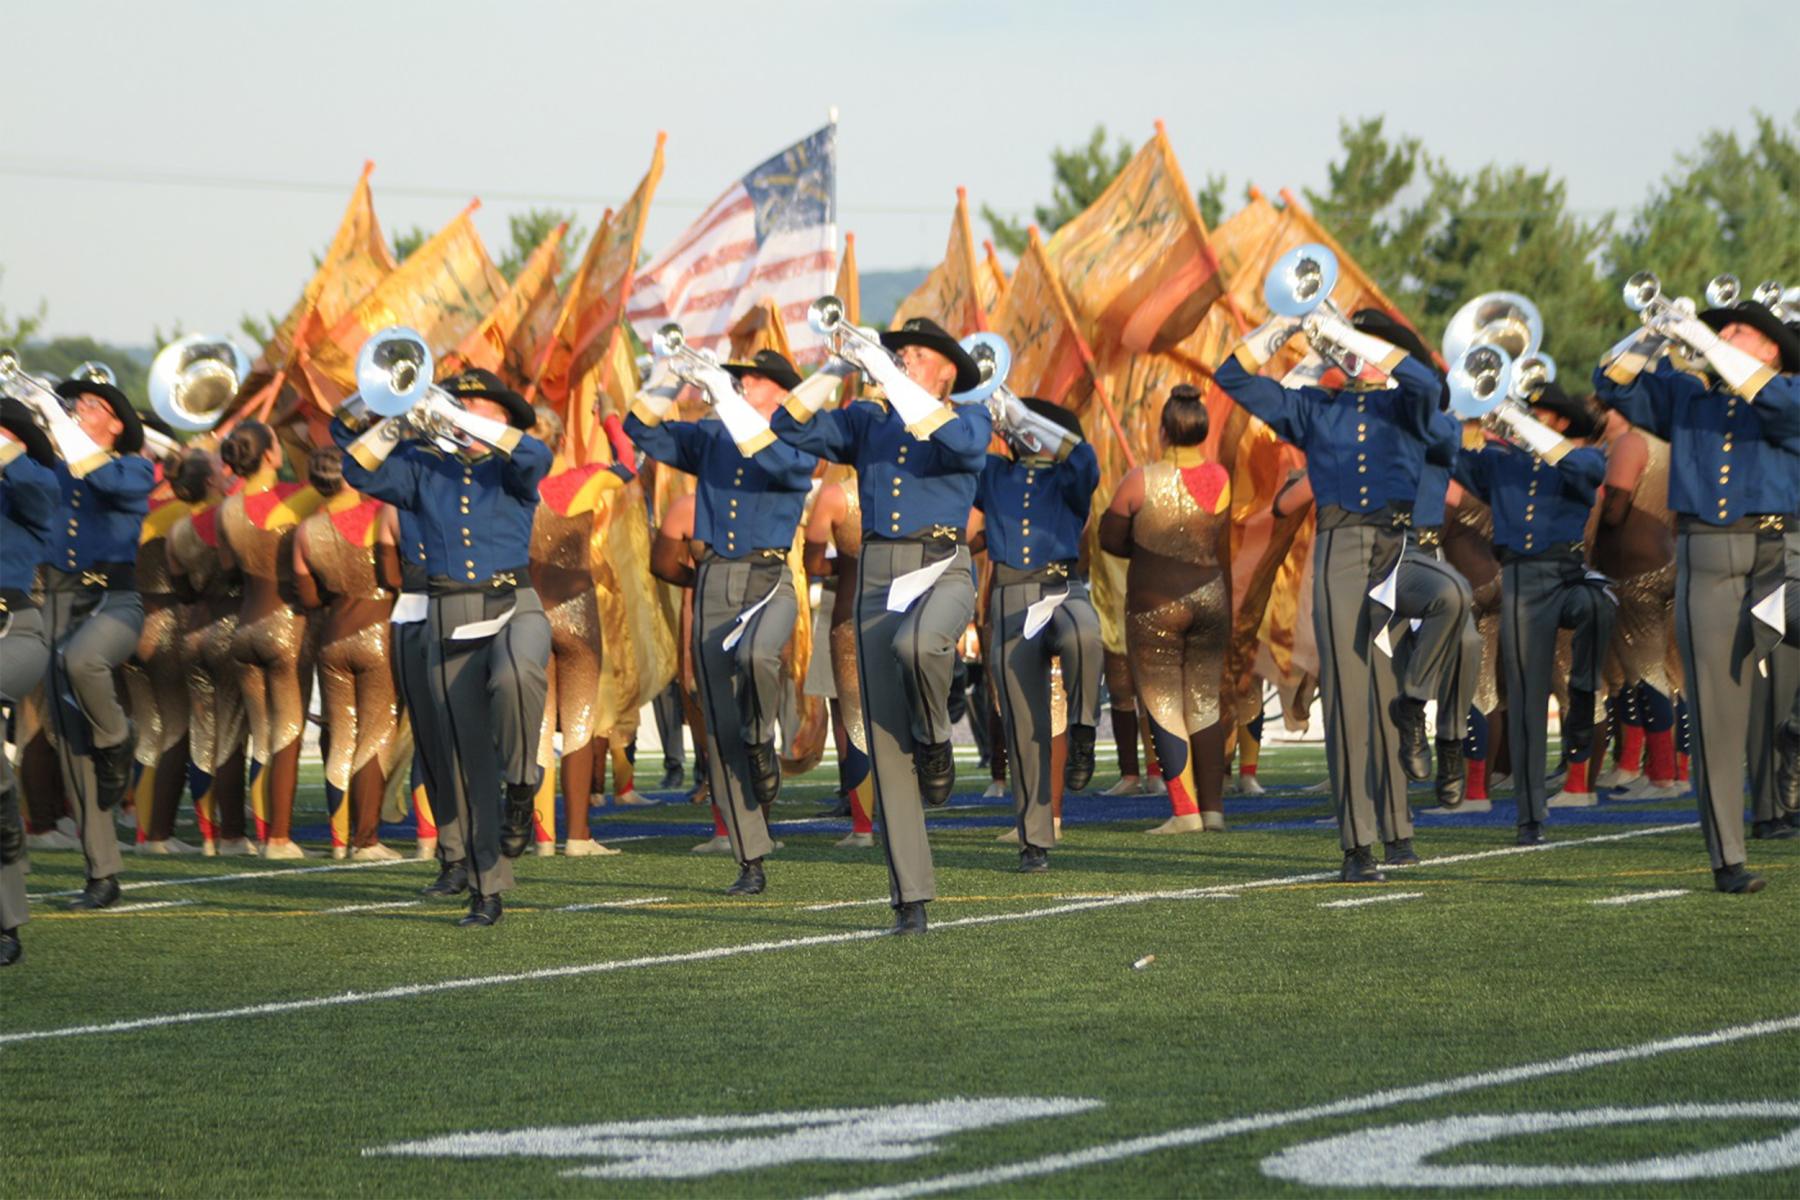 The Troopers march in a “Sunburst” formation with a U.S. flag rising from the center at a late afternoon performance, at the DCI Eastern Classic in Allentown, Pennsylvania, August 2, 2013. Pat Chagnon photo. Troopers Archives #9068.